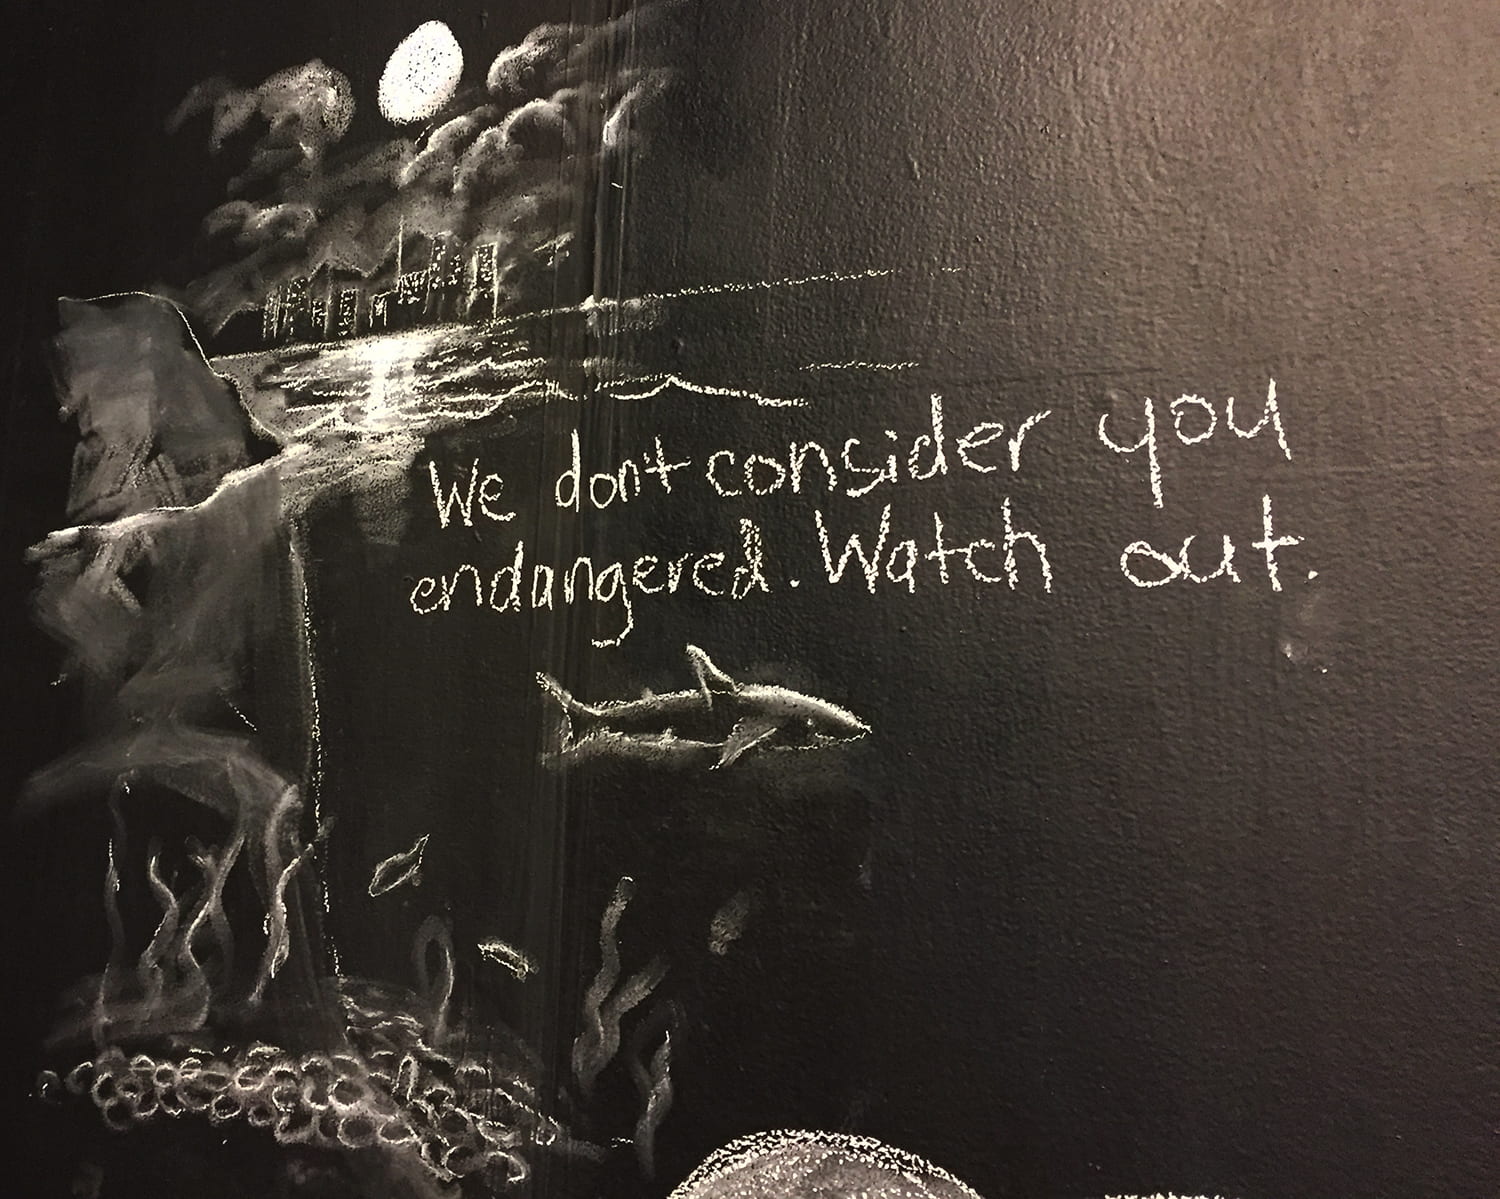 Drawing of the moon over a rain cloud over a river, and underneath a fish swimming away from eggs.  Handwritten words say "We don't consider you endangered. Watch out."